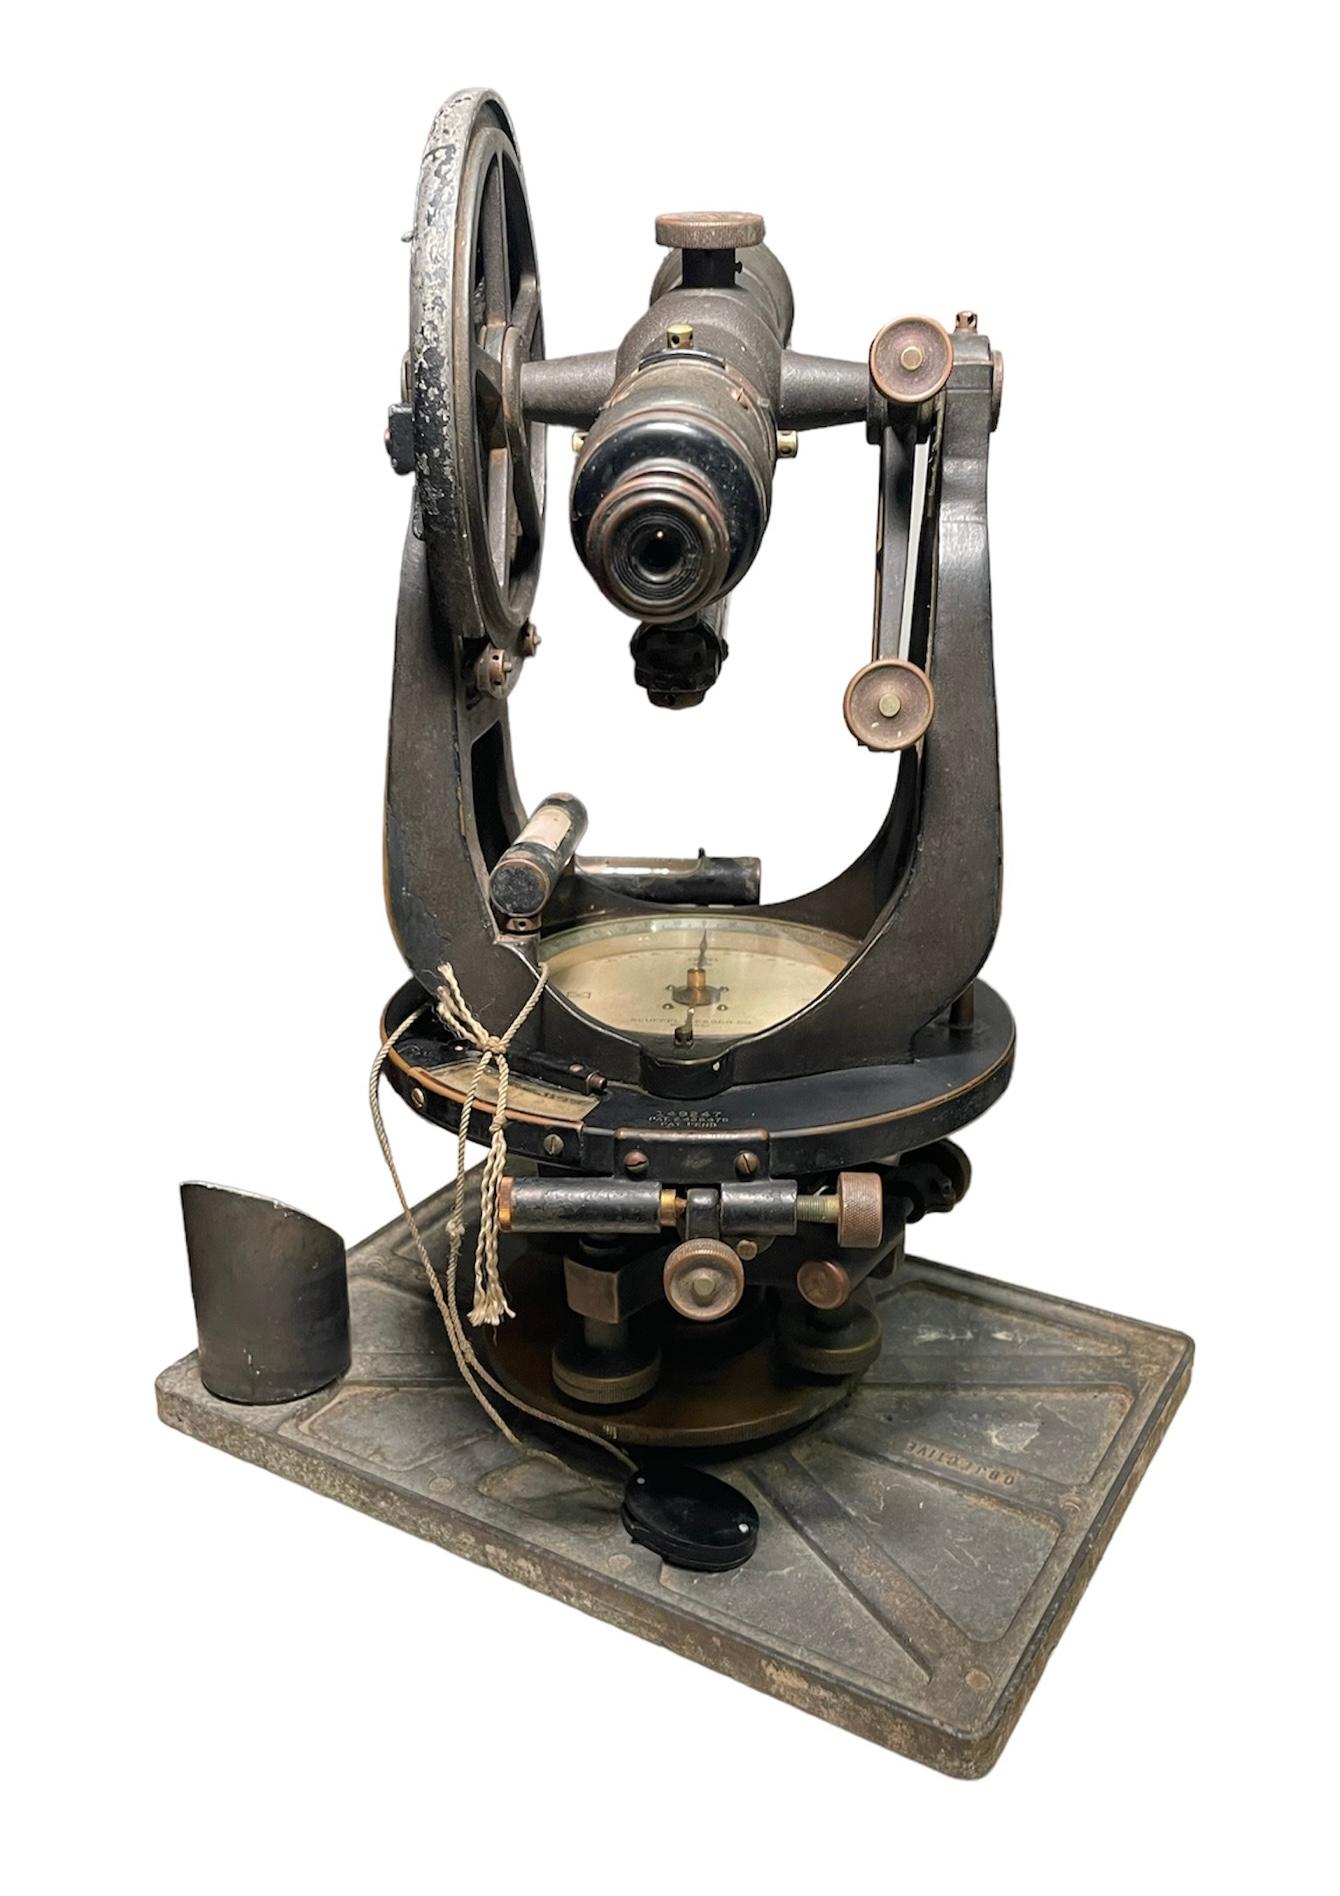 This is a Keuffel & Effer Co. military transit surveyor. It consists of a compass and a telescope. Inside the center of the compass is hallmarked Keuffel & Esser. Also over the front of the base is inscribed K&E Co.